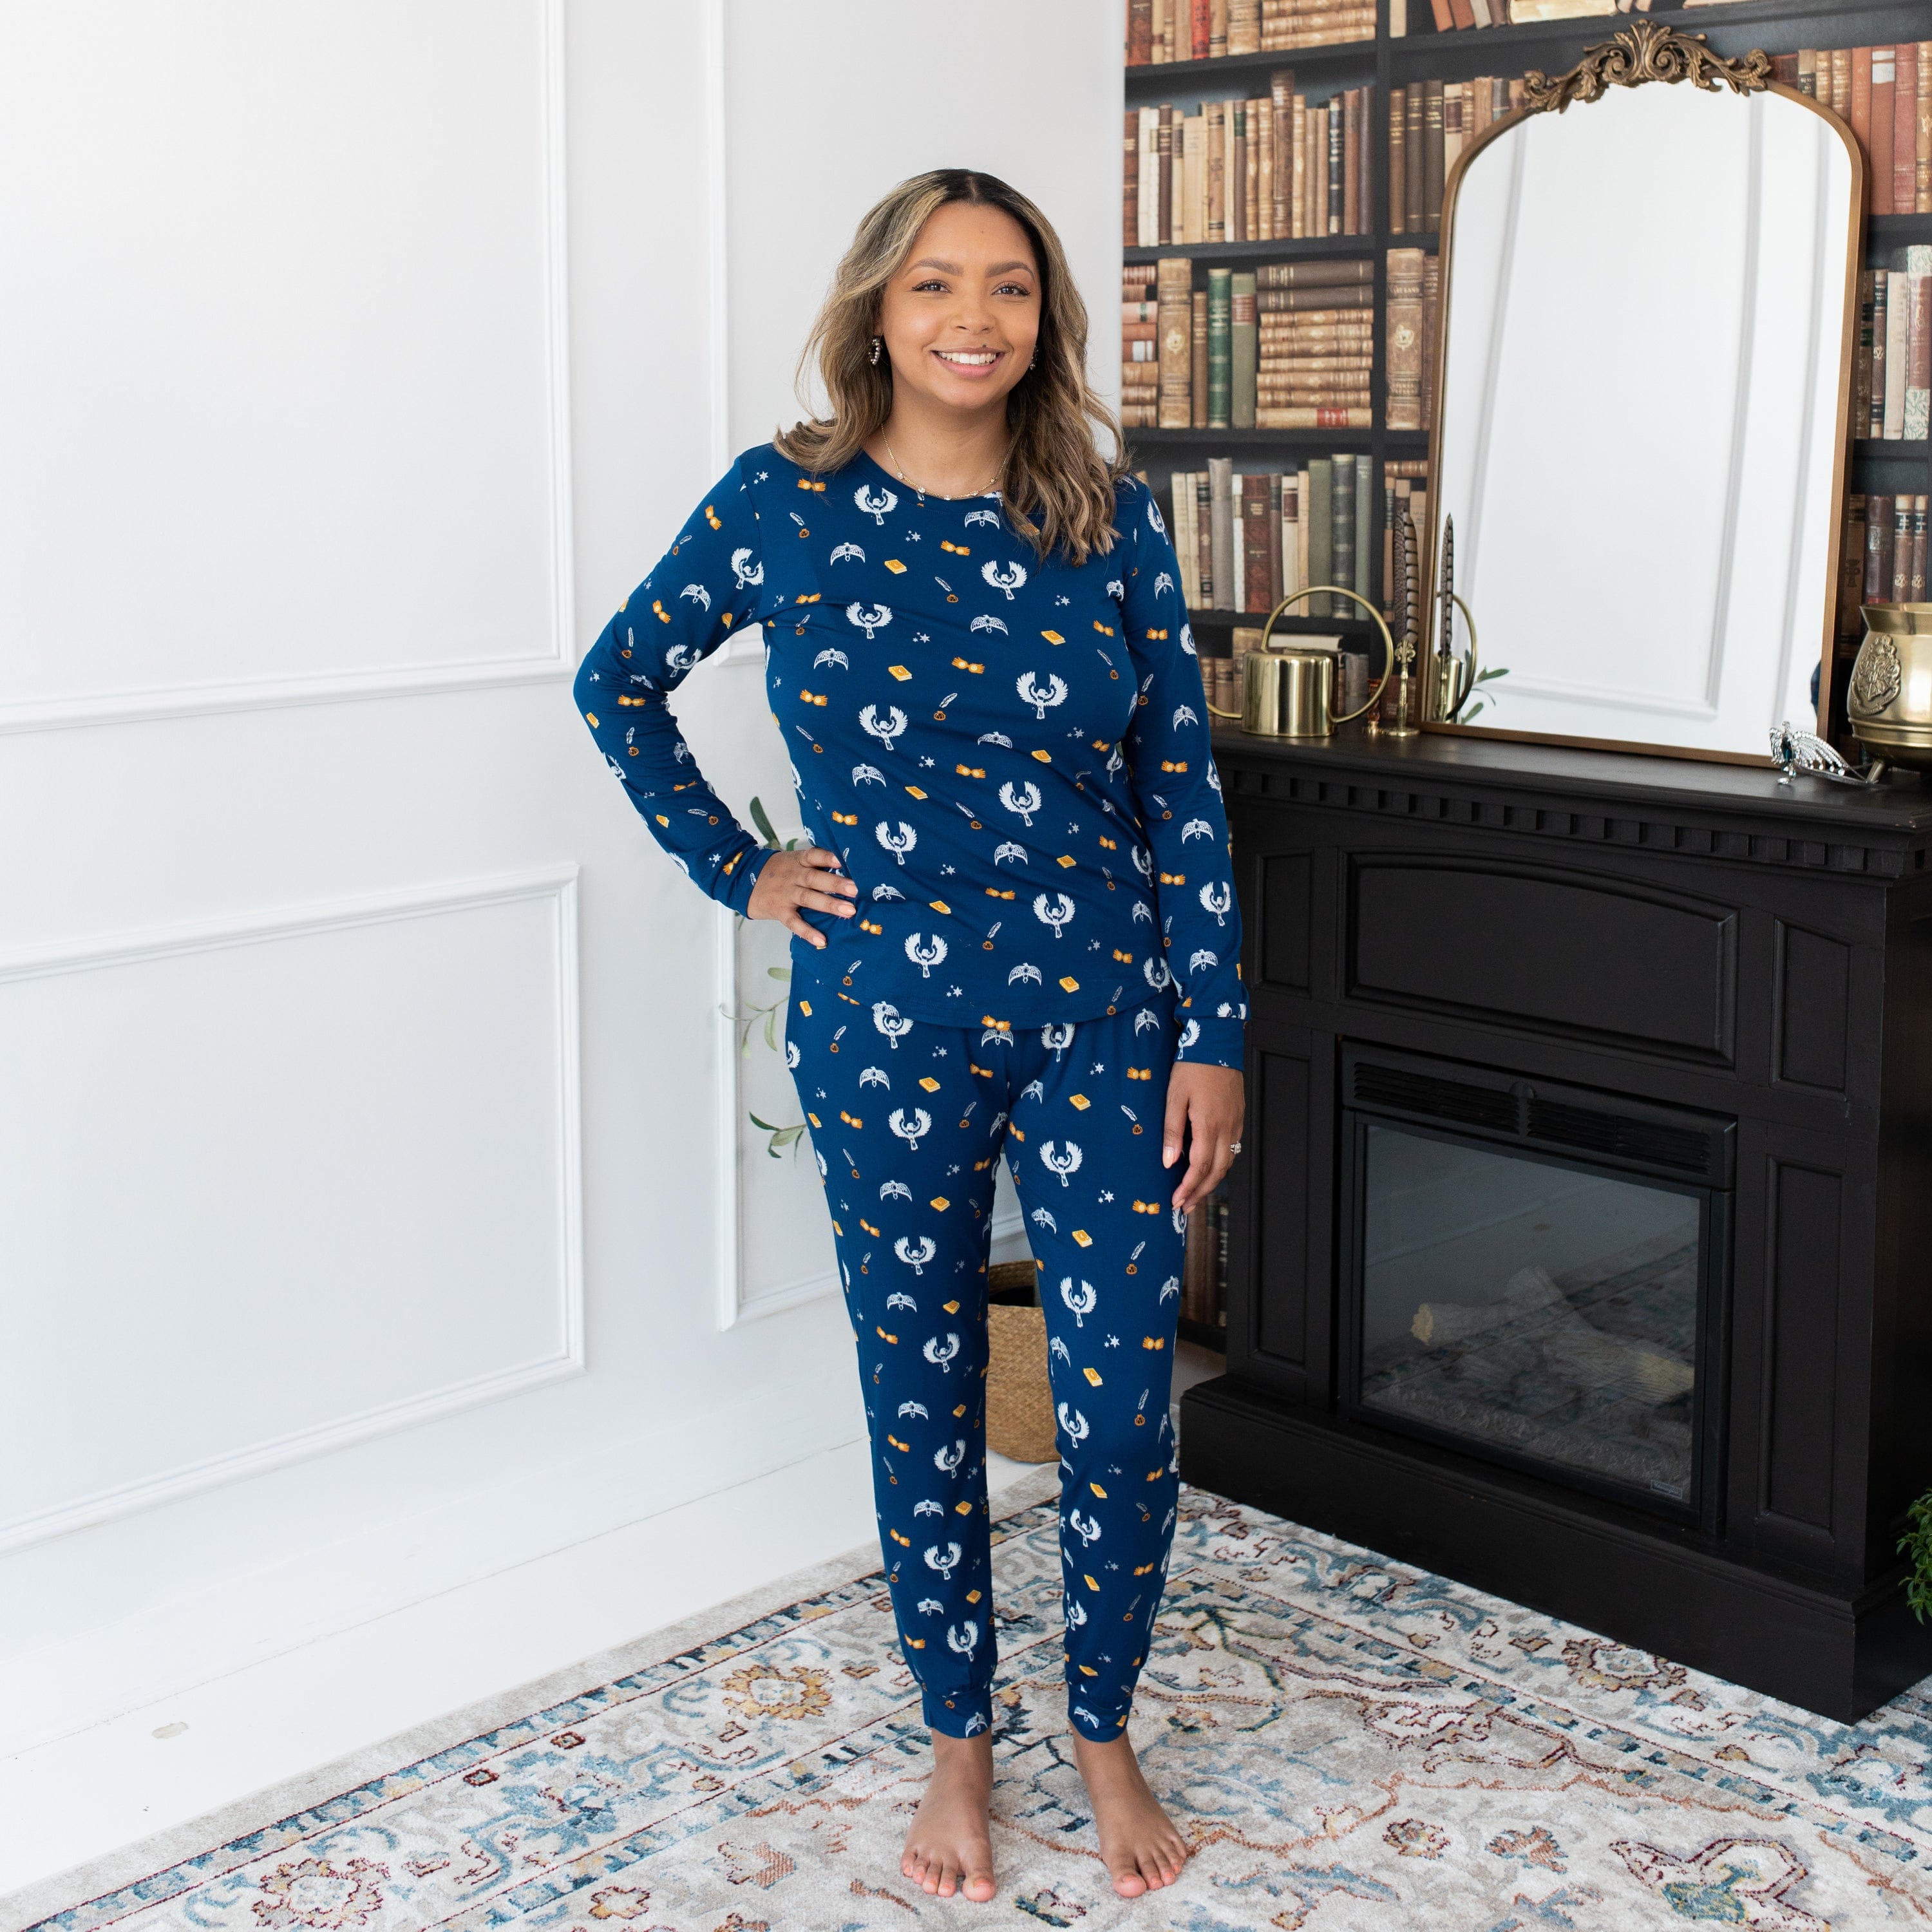 Women's Jogger Pajama Set in Harry Potter™ Ravenclaw™